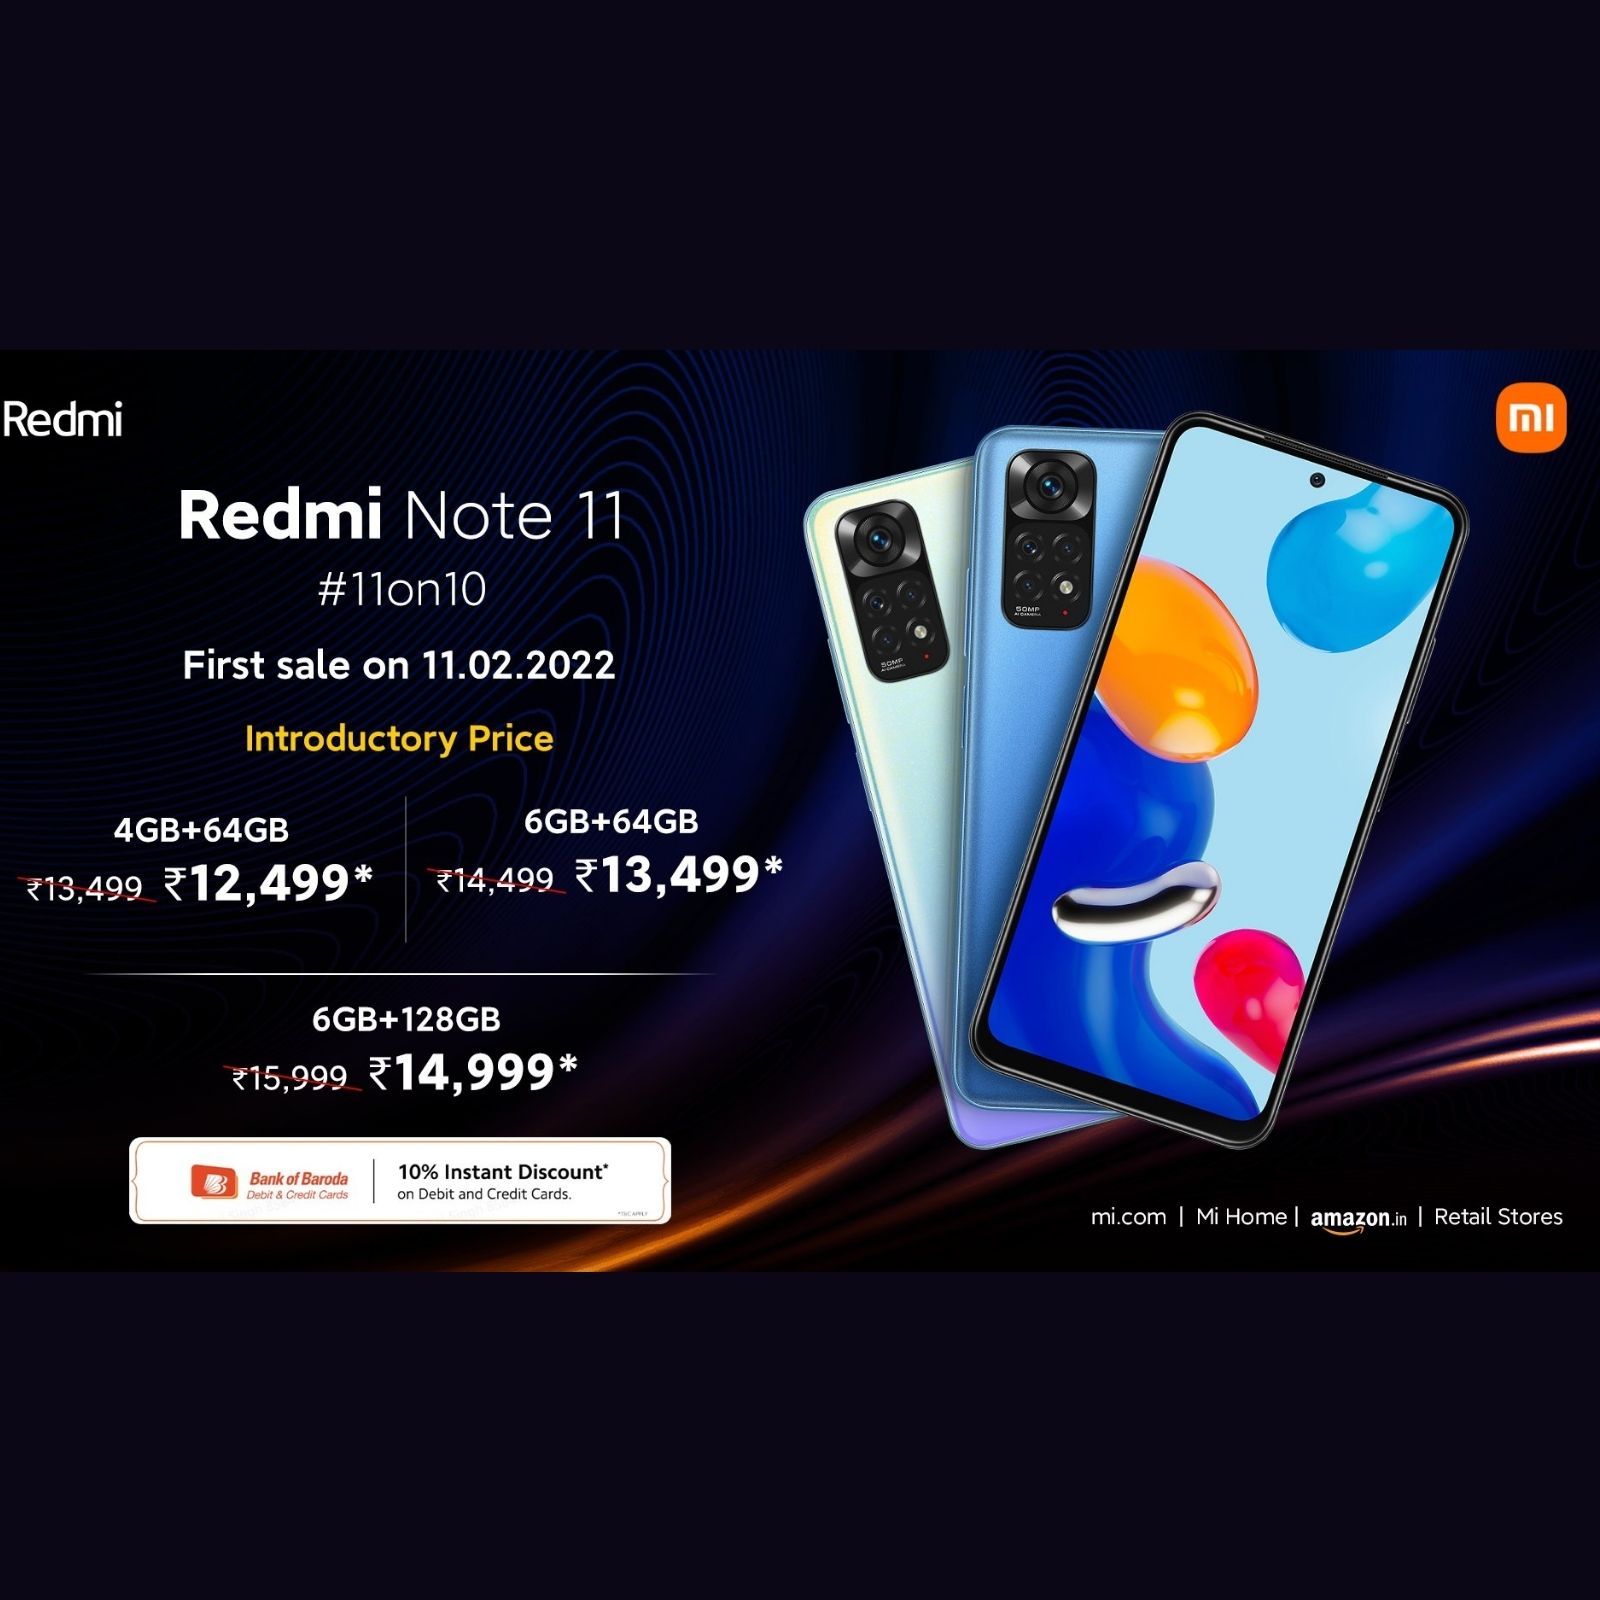 Redmi Note 11 vs Redmi Note 11S: Specs, features, and India prices compared